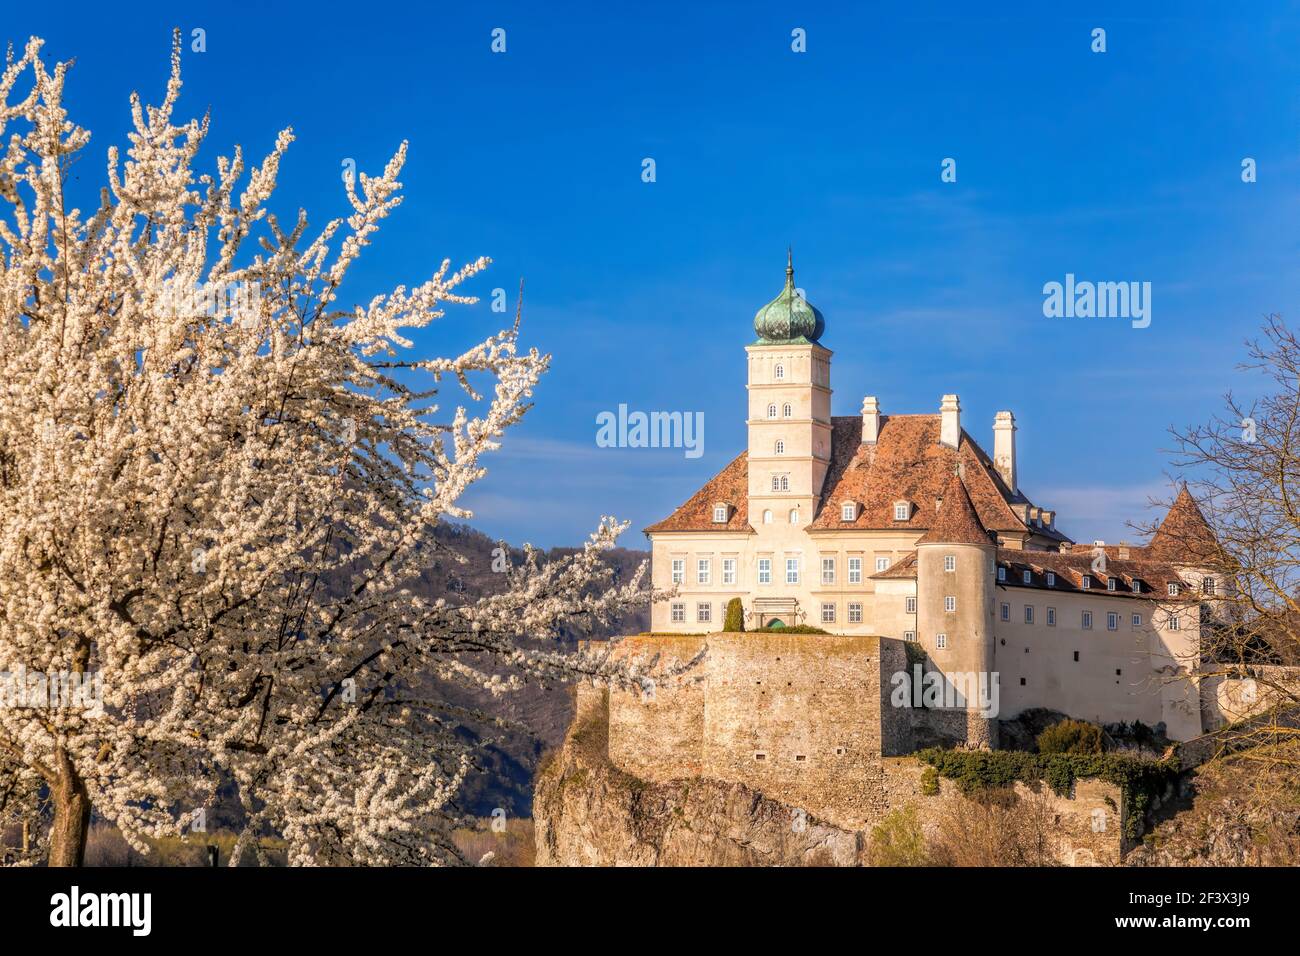 The medieval Schonbuhel castle, built on a rock over Danube river during spring time in Wachau valley, UNESCO cultural landscape, Austria Stock Photo